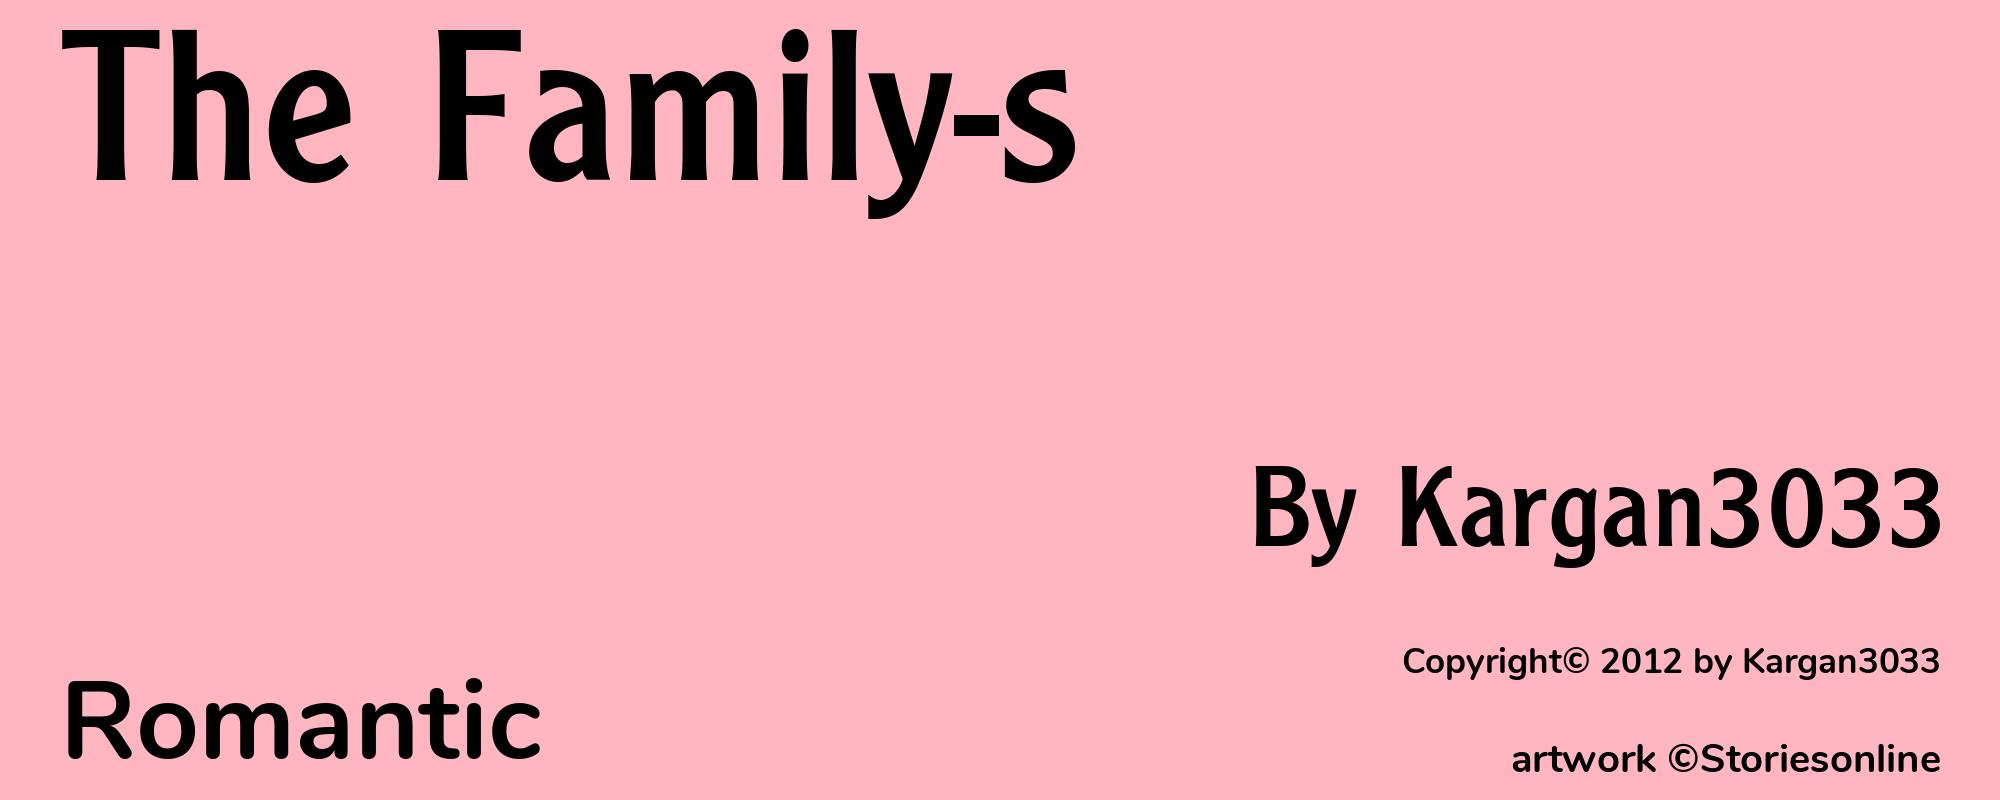 The Family-s - Cover